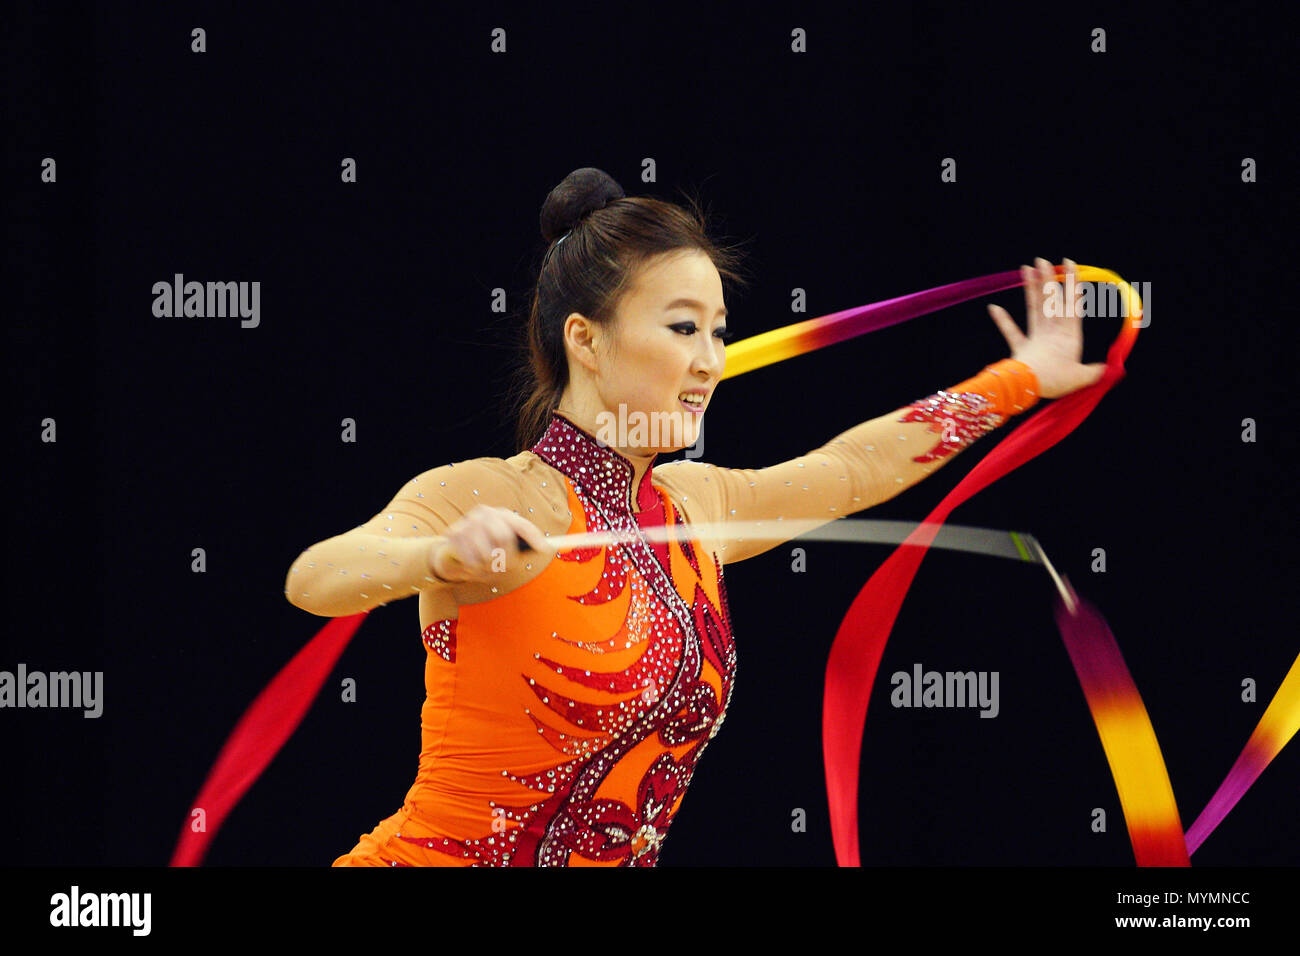 Visa Federation of International Gymnastics (FIG) - Yun Hee Gim of Korea performs with the Ribbon during the Women's Rhythmic Olympic qualification event at the O2 Arena London 17 January 2012 --- Image by © Paul Cunningham Stock Photo